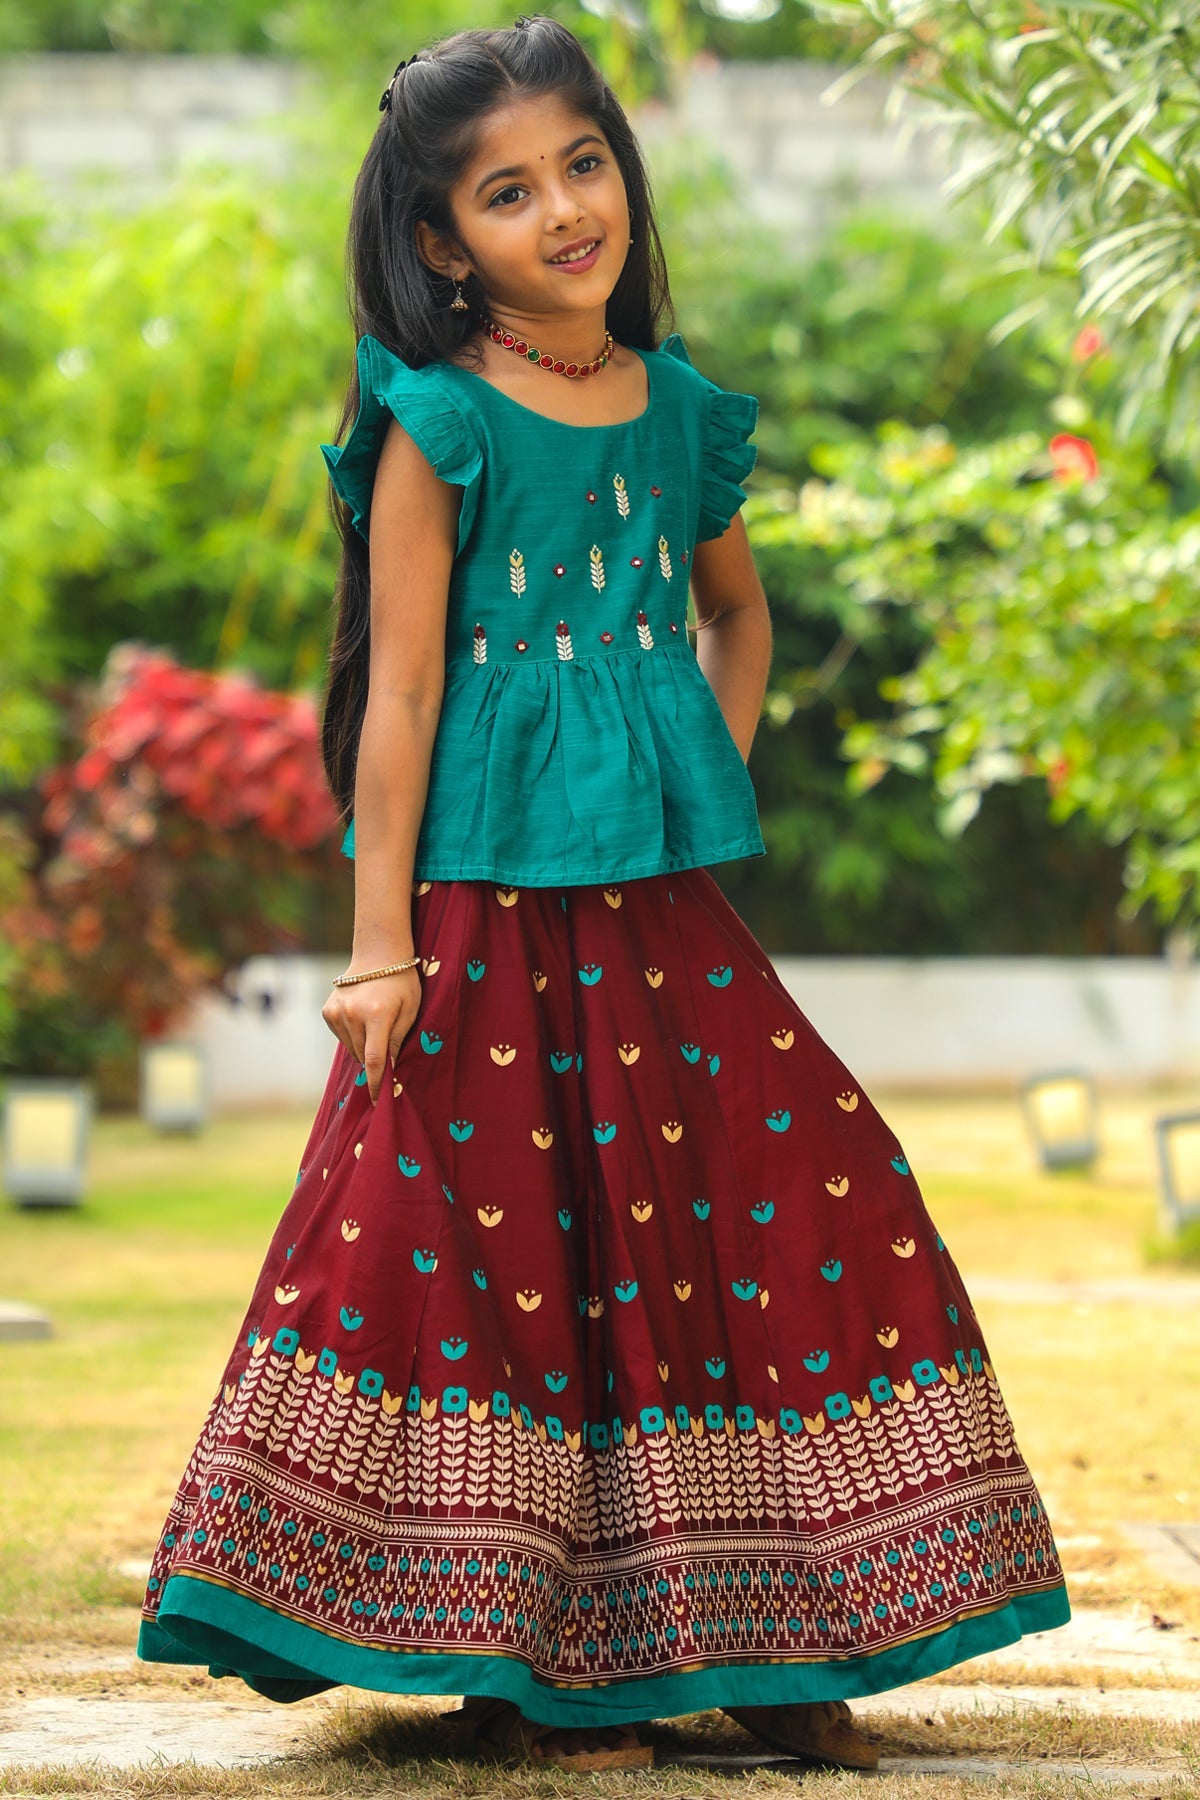 Floral Motif Embroidered Top & All Over Geometric Printed Skirt Set - Green & Maroon